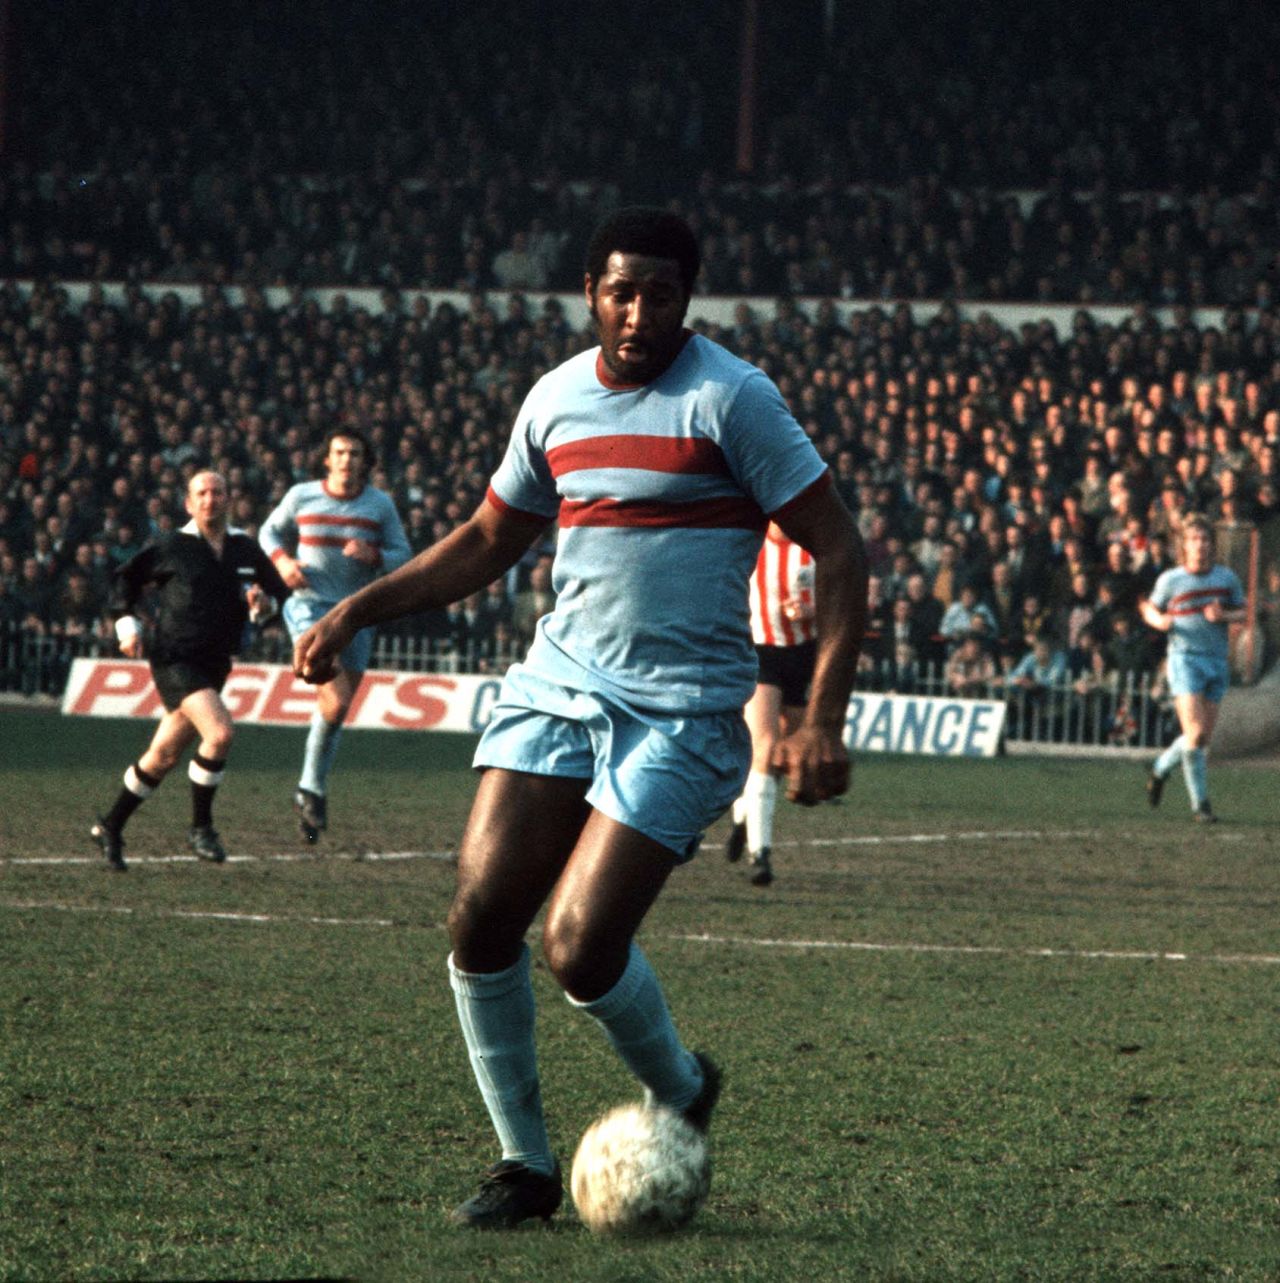 Clyde Best made his West Ham United debut in 1968, and the striker became one of the first black players to establish himself as a first-team regular in England's top division.